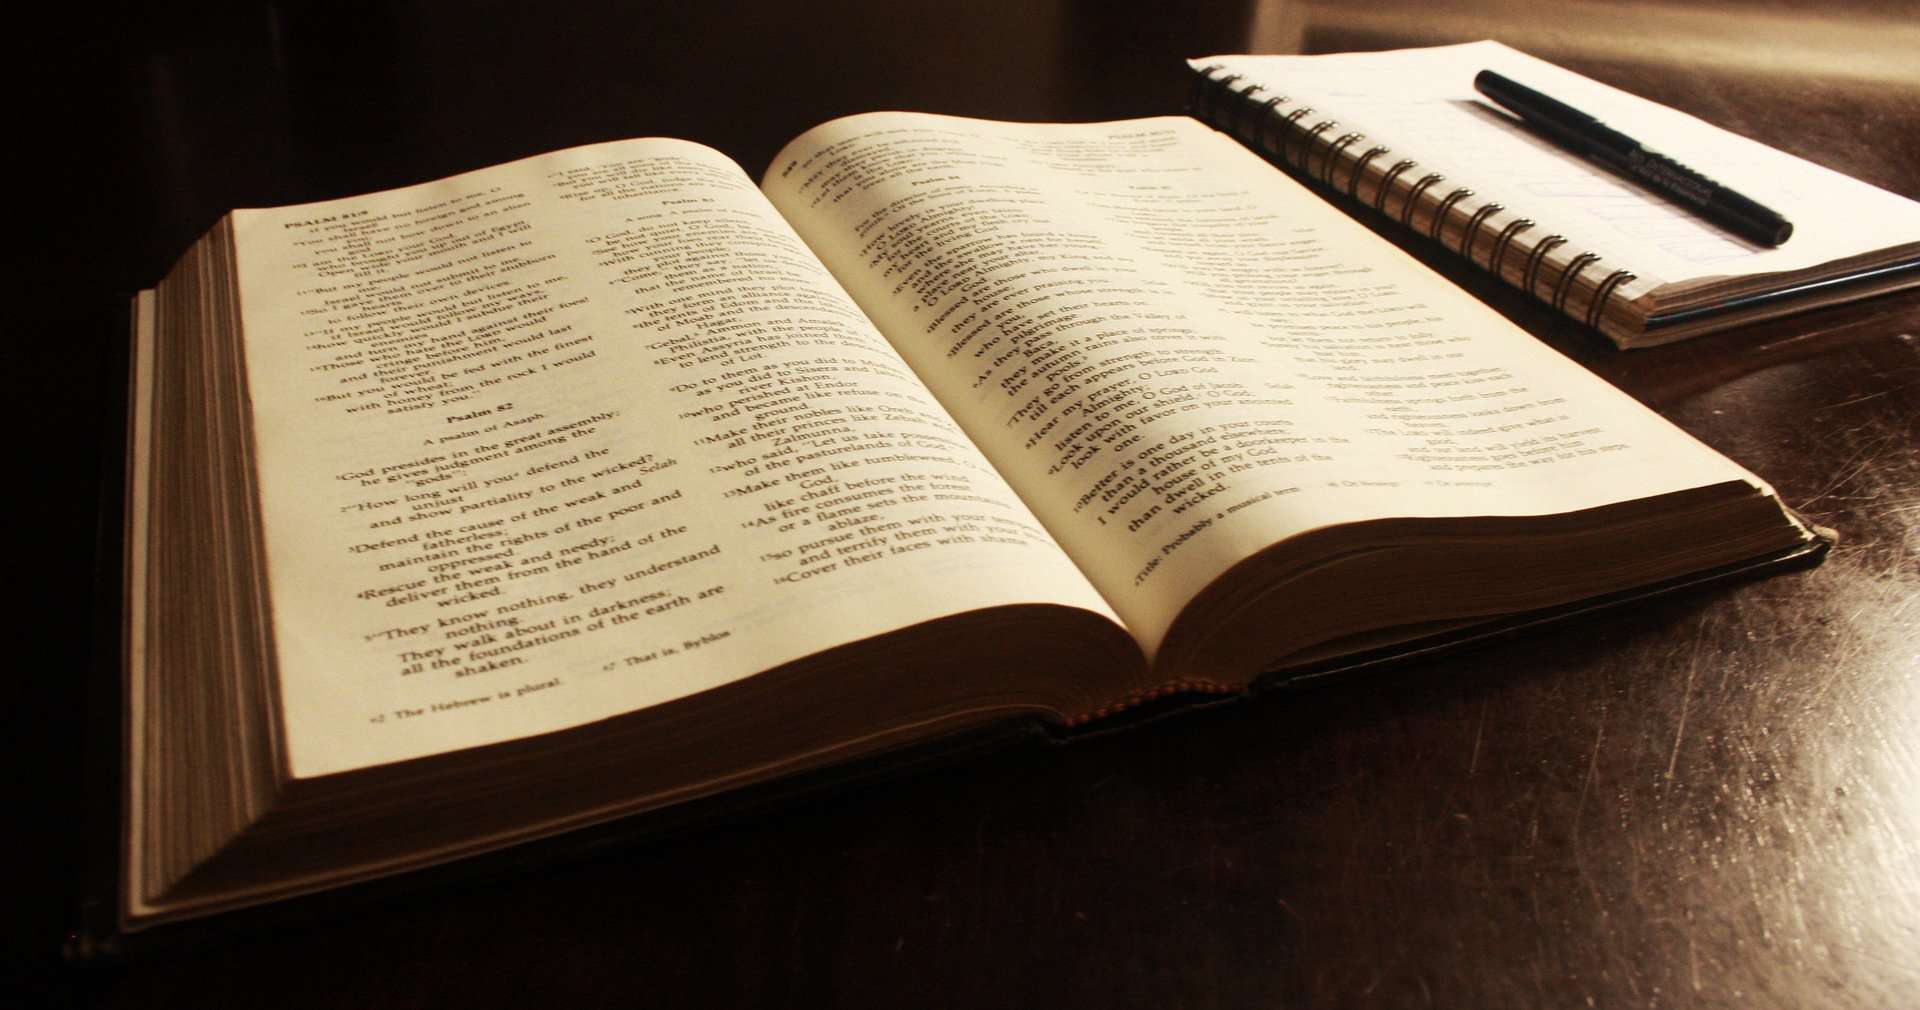 An open Bible is shown sitting on a table next to a pad of paper with a pen resting on it.